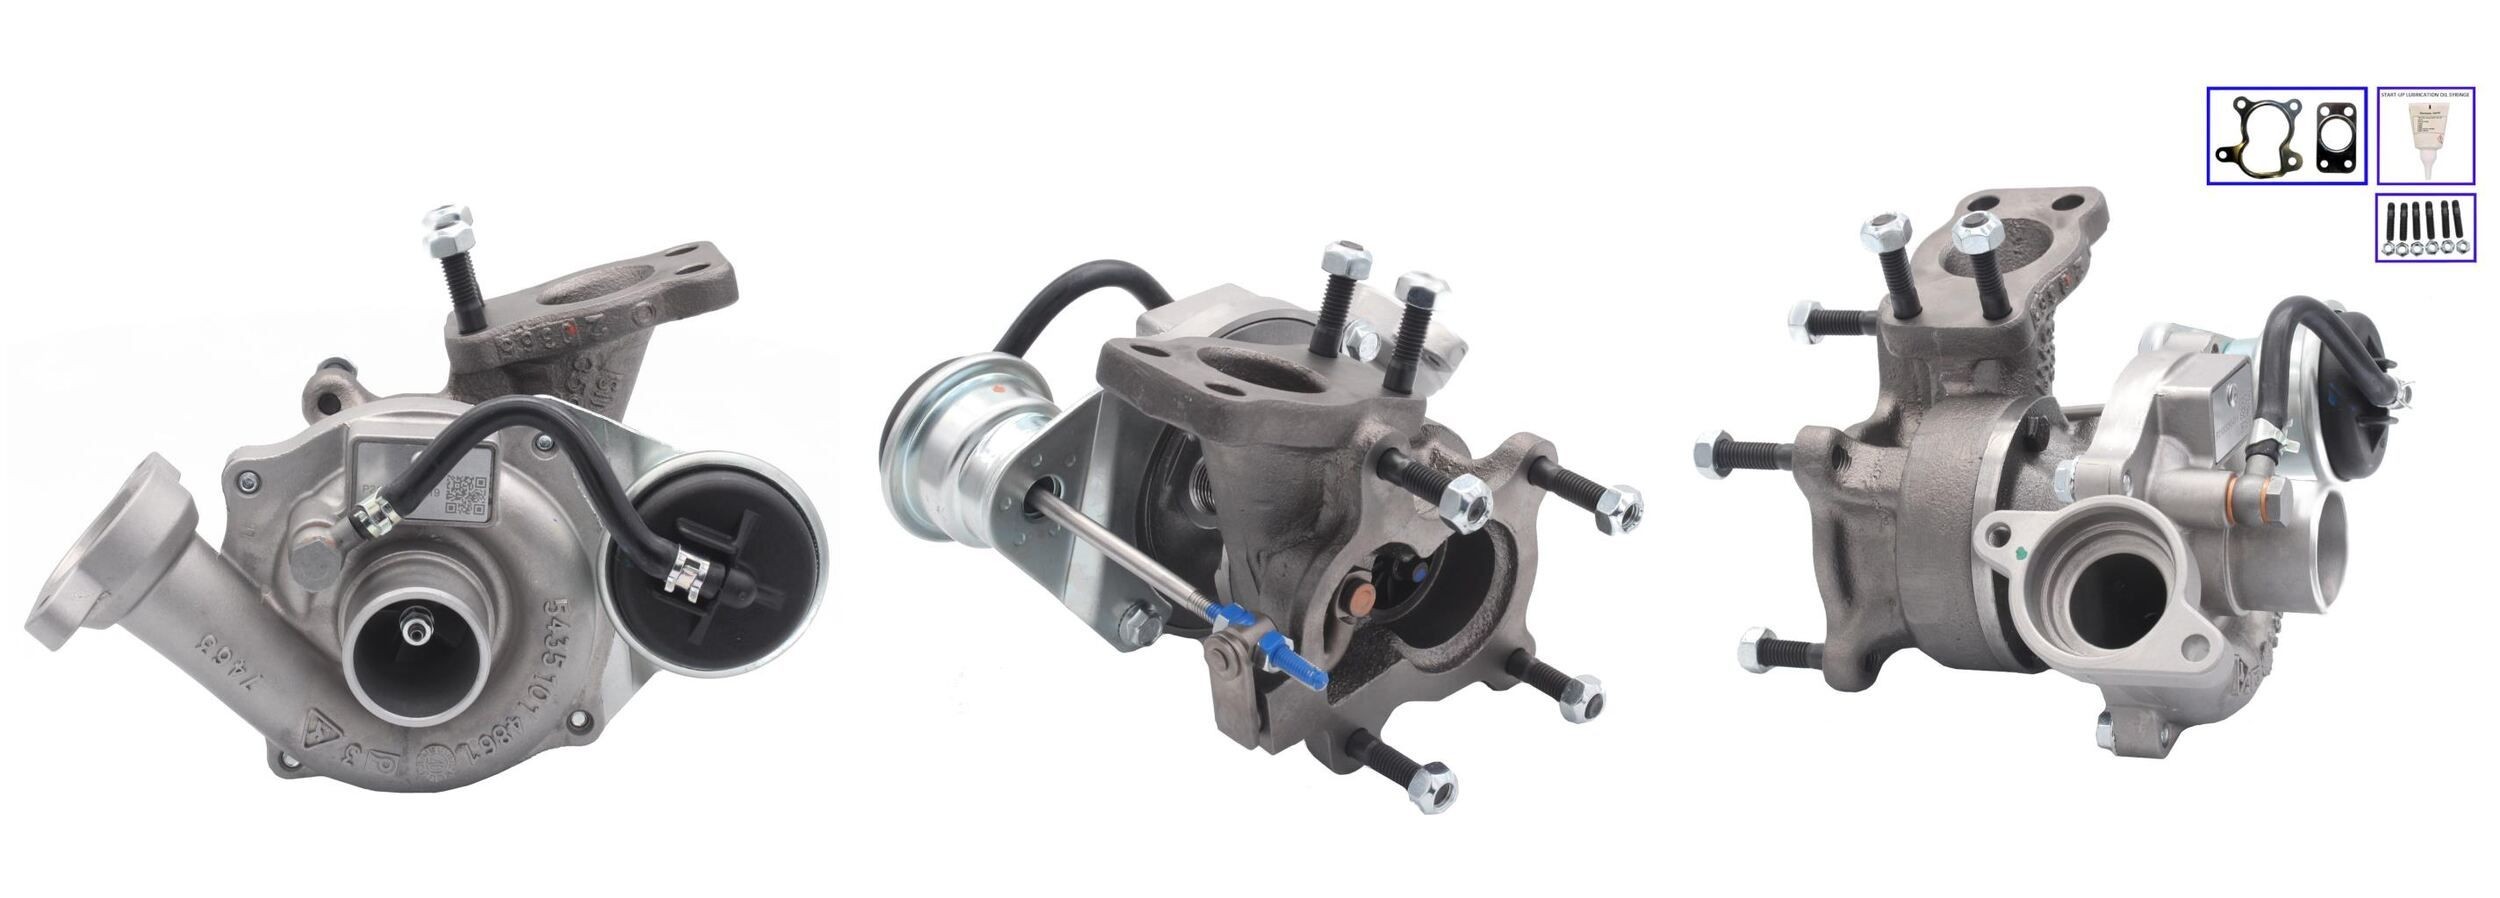 LUCAS Exhaust Turbocharger, Pneumatically controlled actuator, with gaskets/seals Turbo LTRPA54359880009 buy